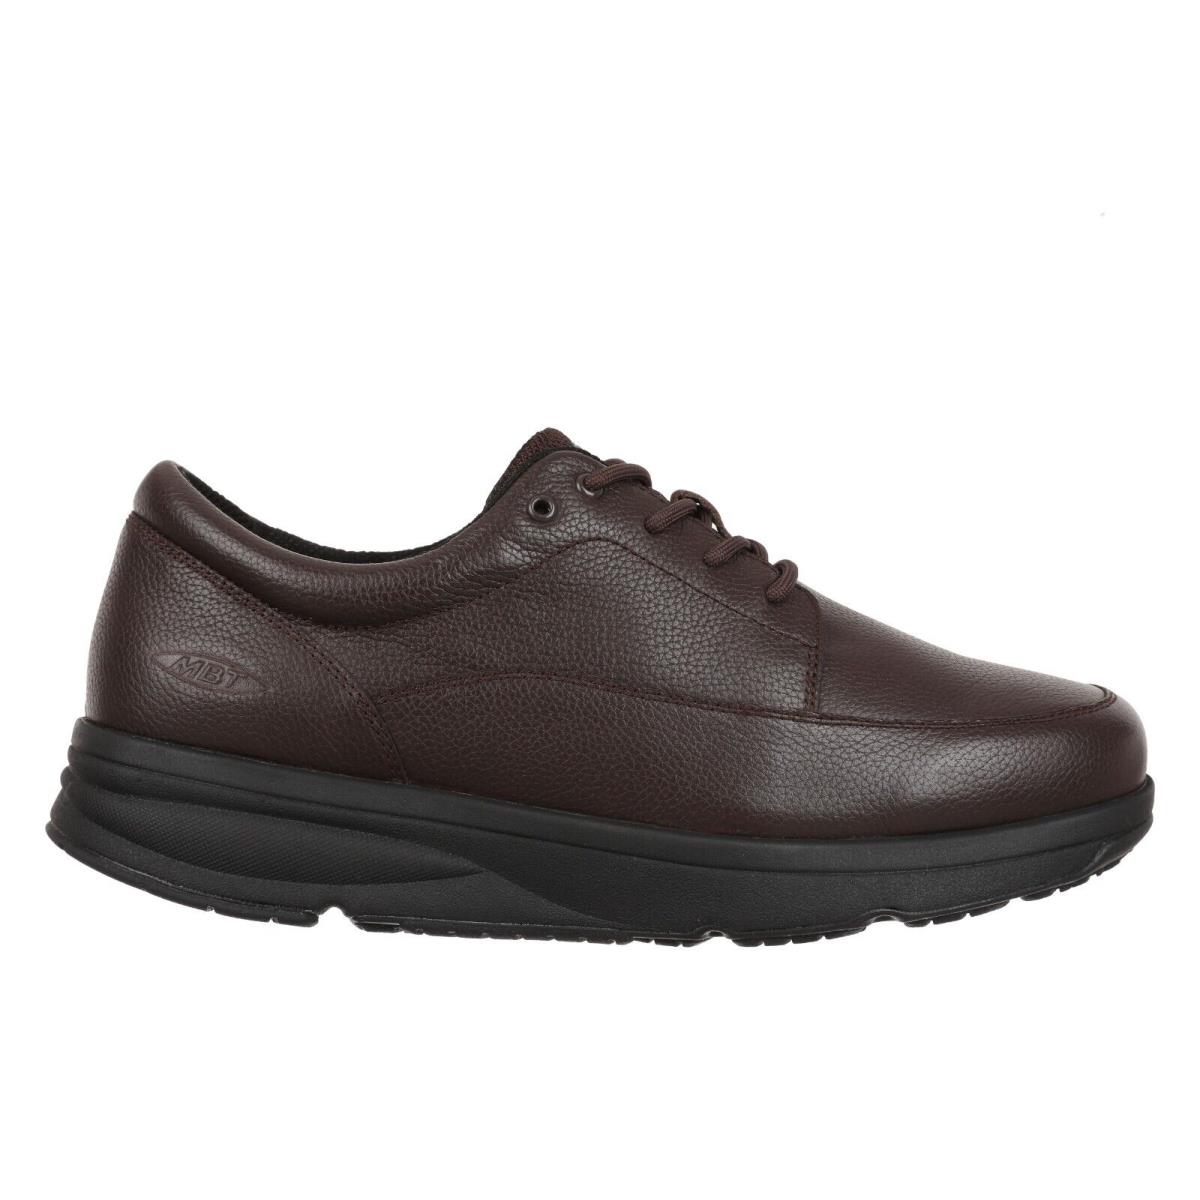 Mbt Walking 1000, Nevada Men`s Casual Leather Walker Shoe Walking 1000 Nevada 3 Colors NEVADA-BROWN/LACE UP